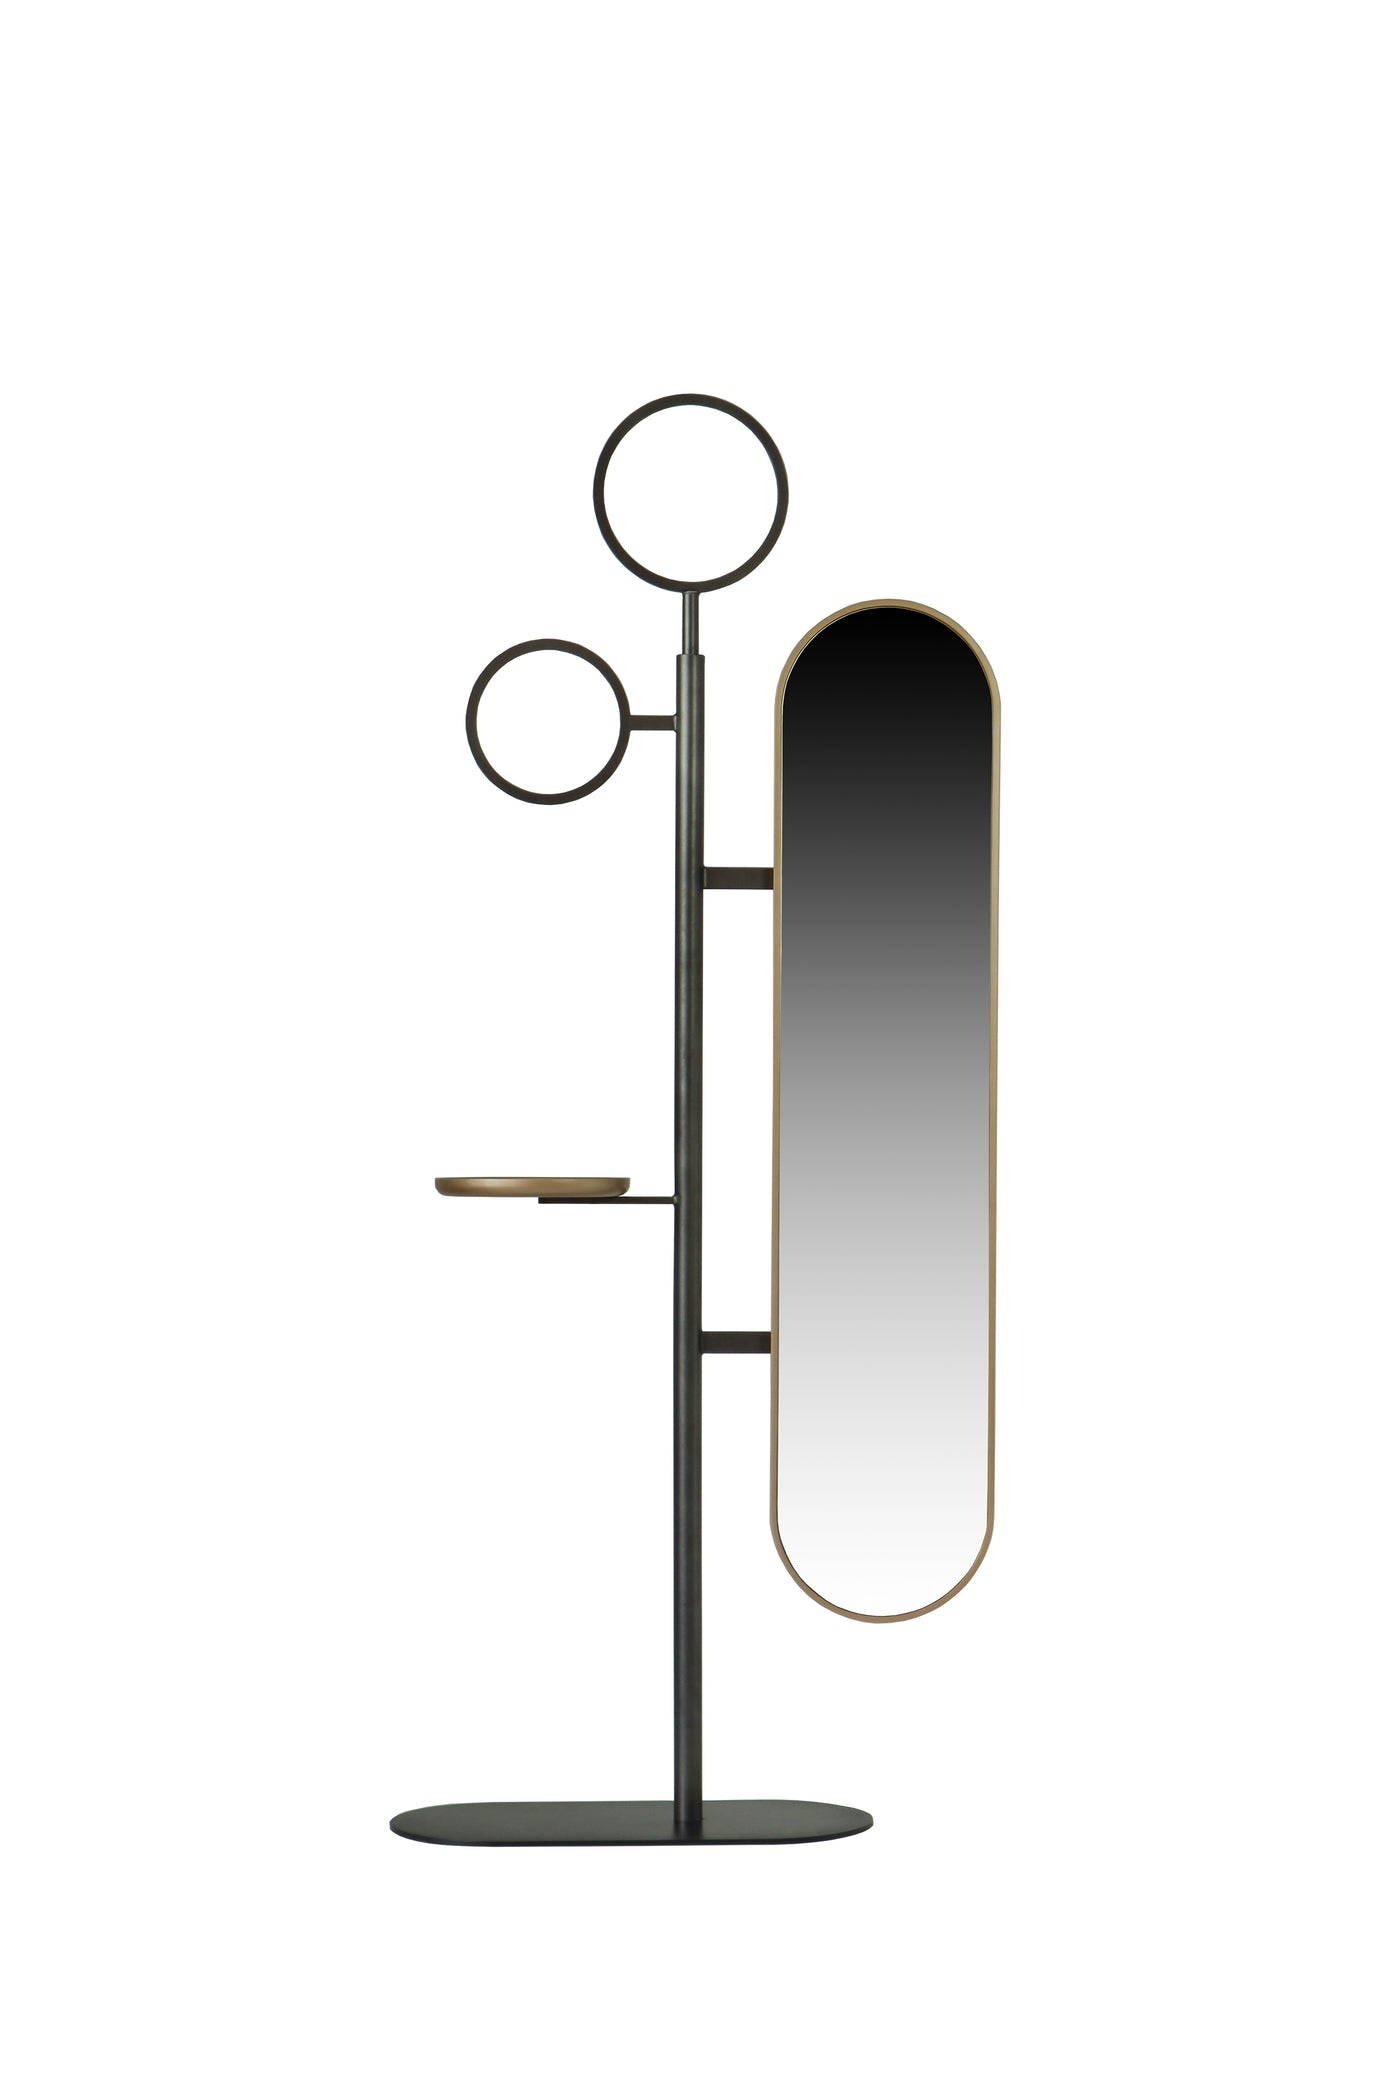 STATION MIRROR CLOTH STAND